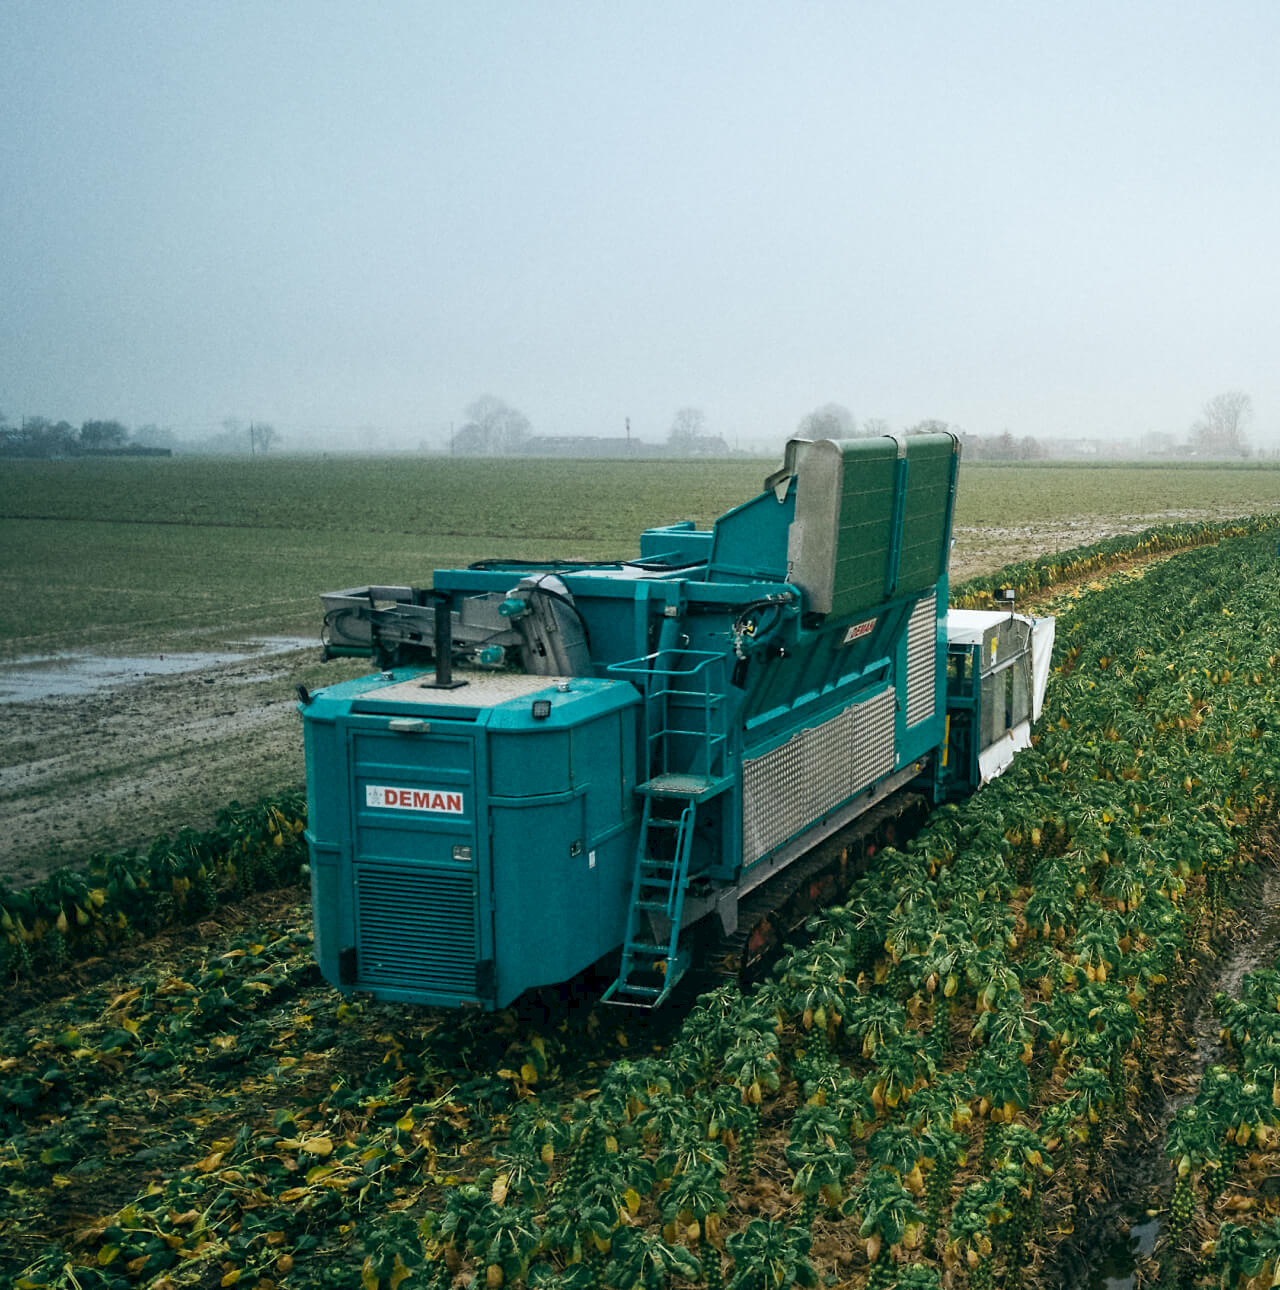 Deman Sprout Harvester on a field